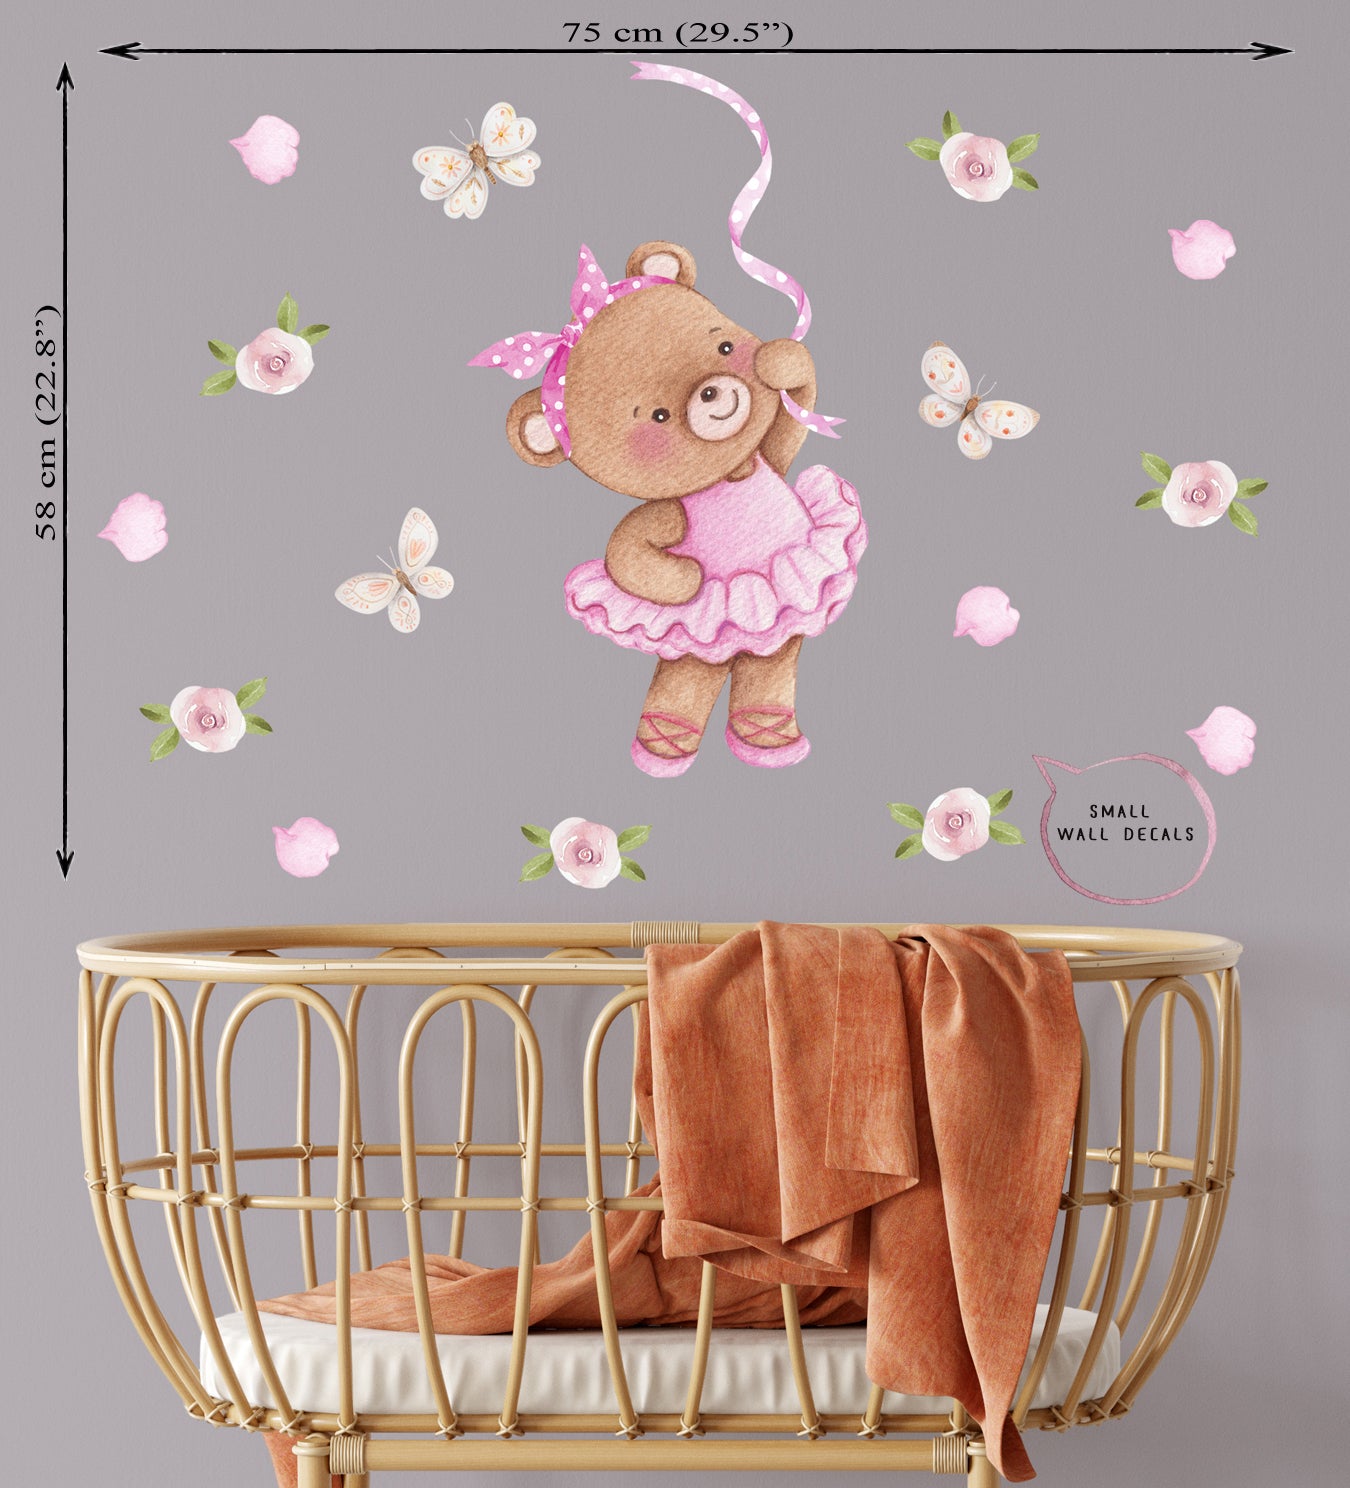 Teddy bear ballerina. Small wall decals for baby nursery. Flowers, roses and butterflies.